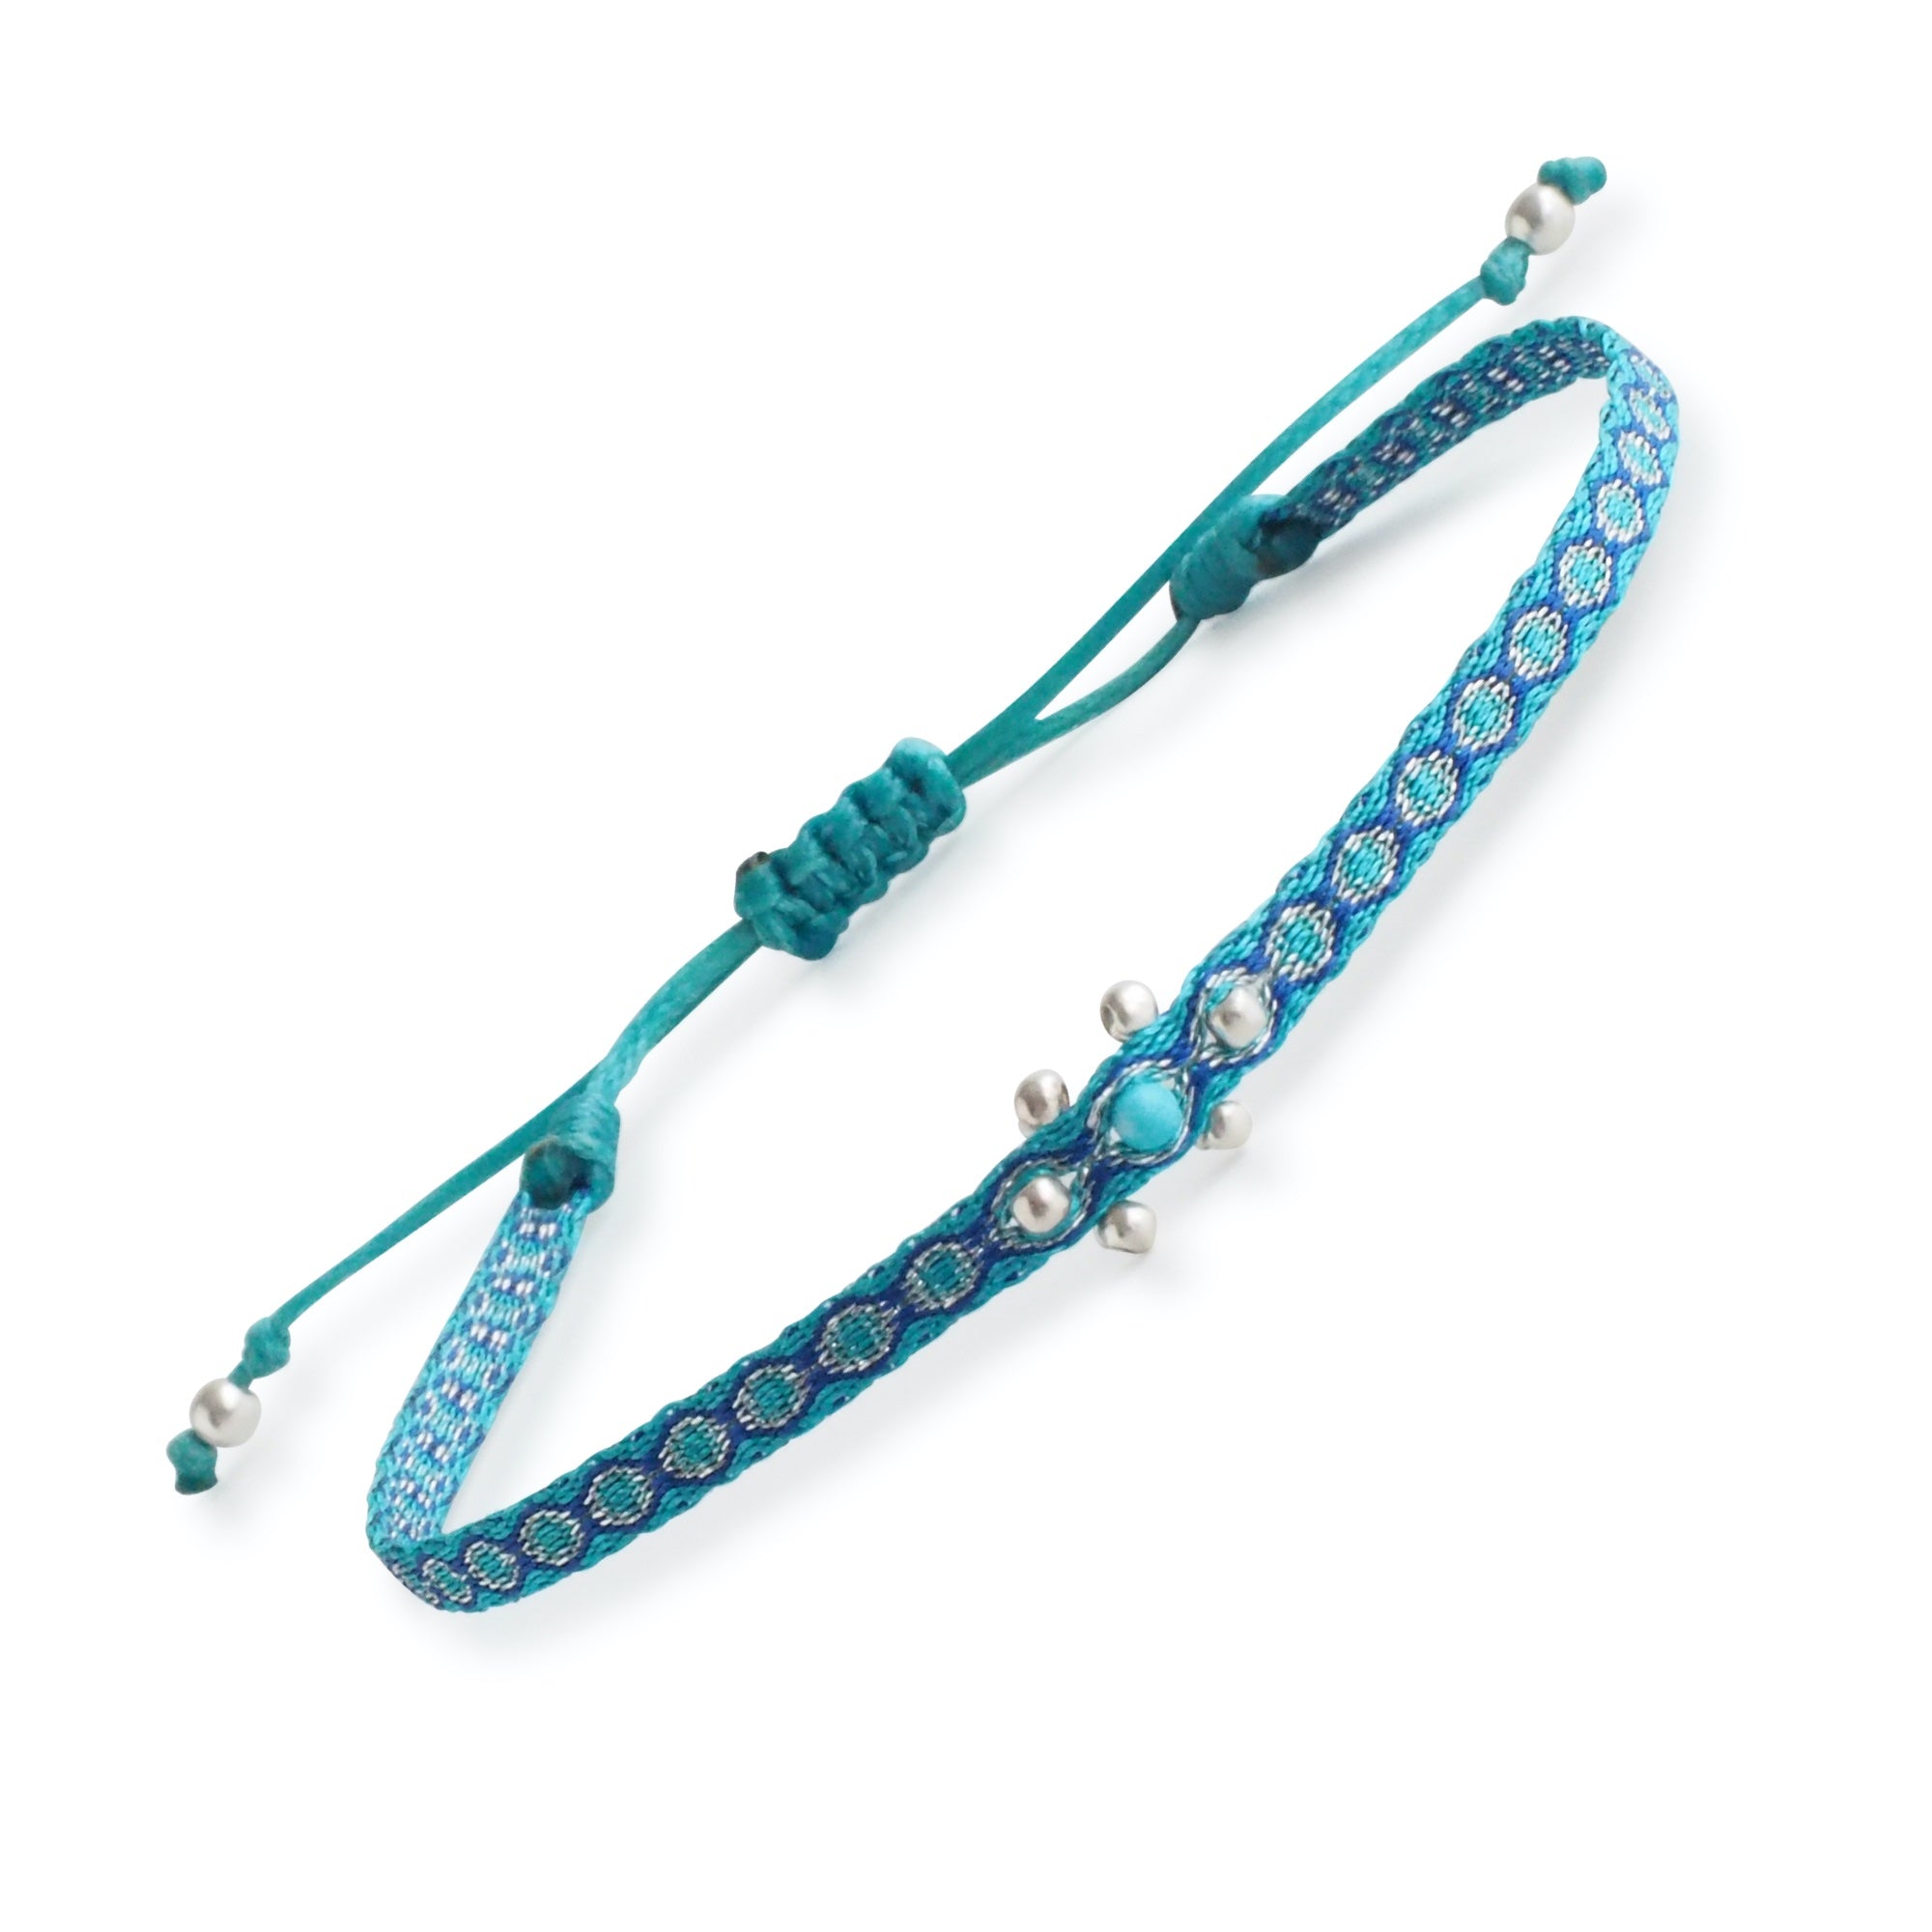 Adjustable Egyptian Loom Beaded Centered Chakra Bracelets Blue, With turquoise gemstone in the center and sterling silver beads